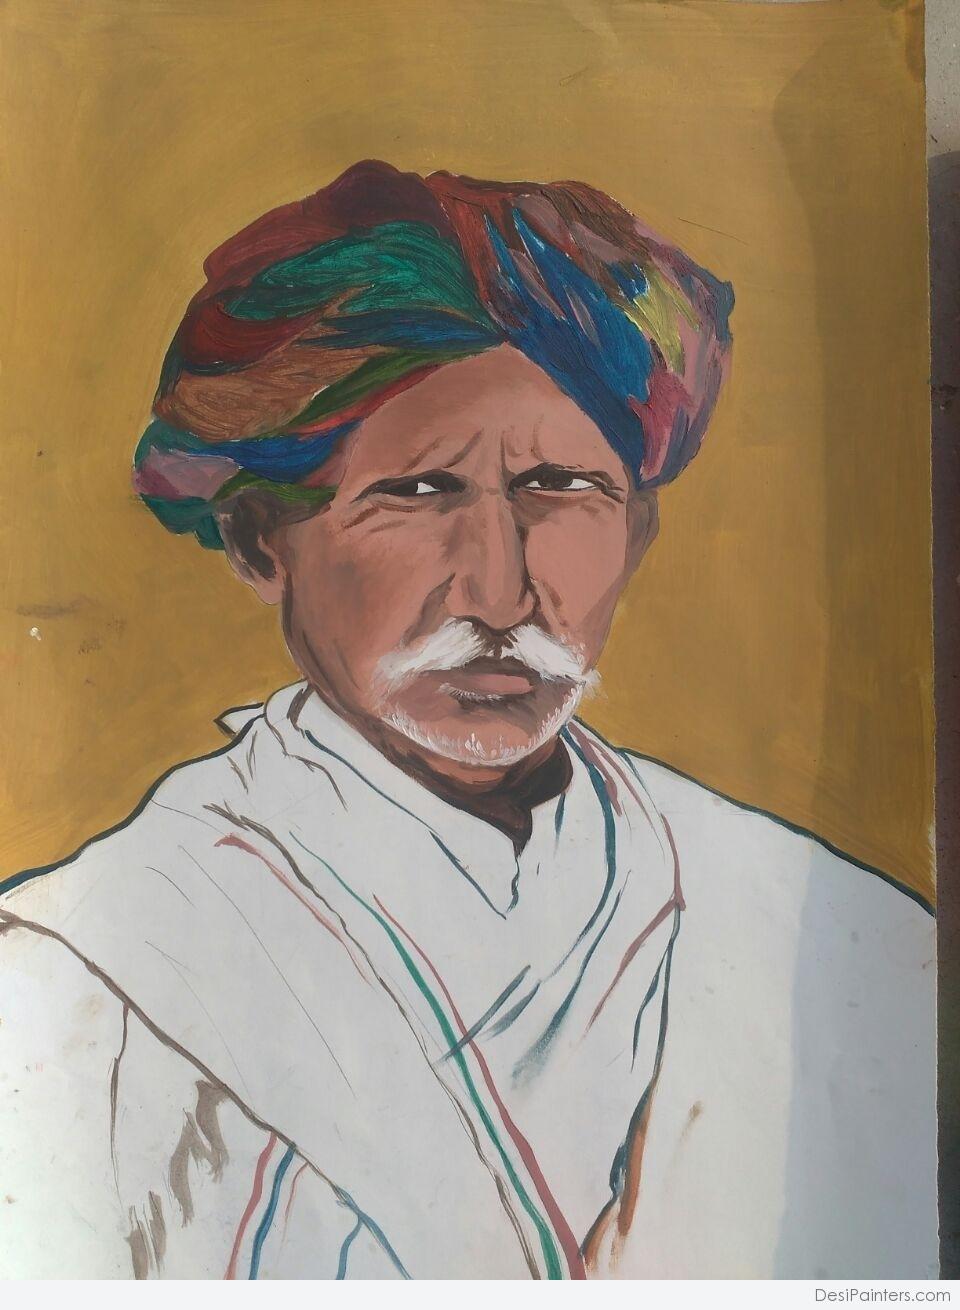 Excellent Oil Painting Of Rajasthani Man Art | DesiPainters.com